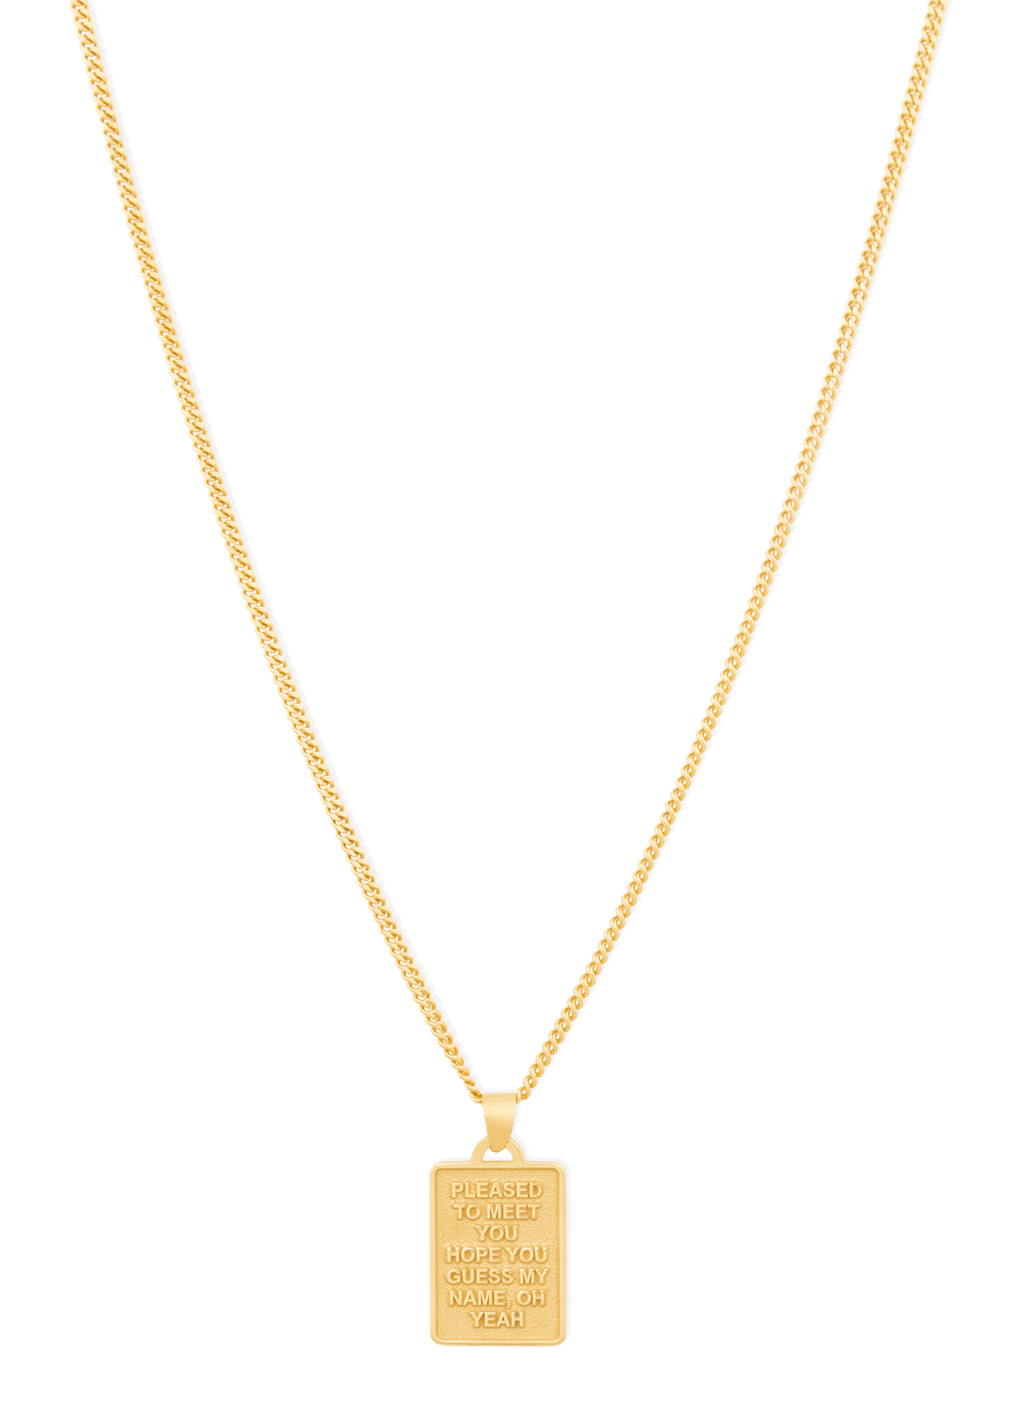 jodie shaped necklace